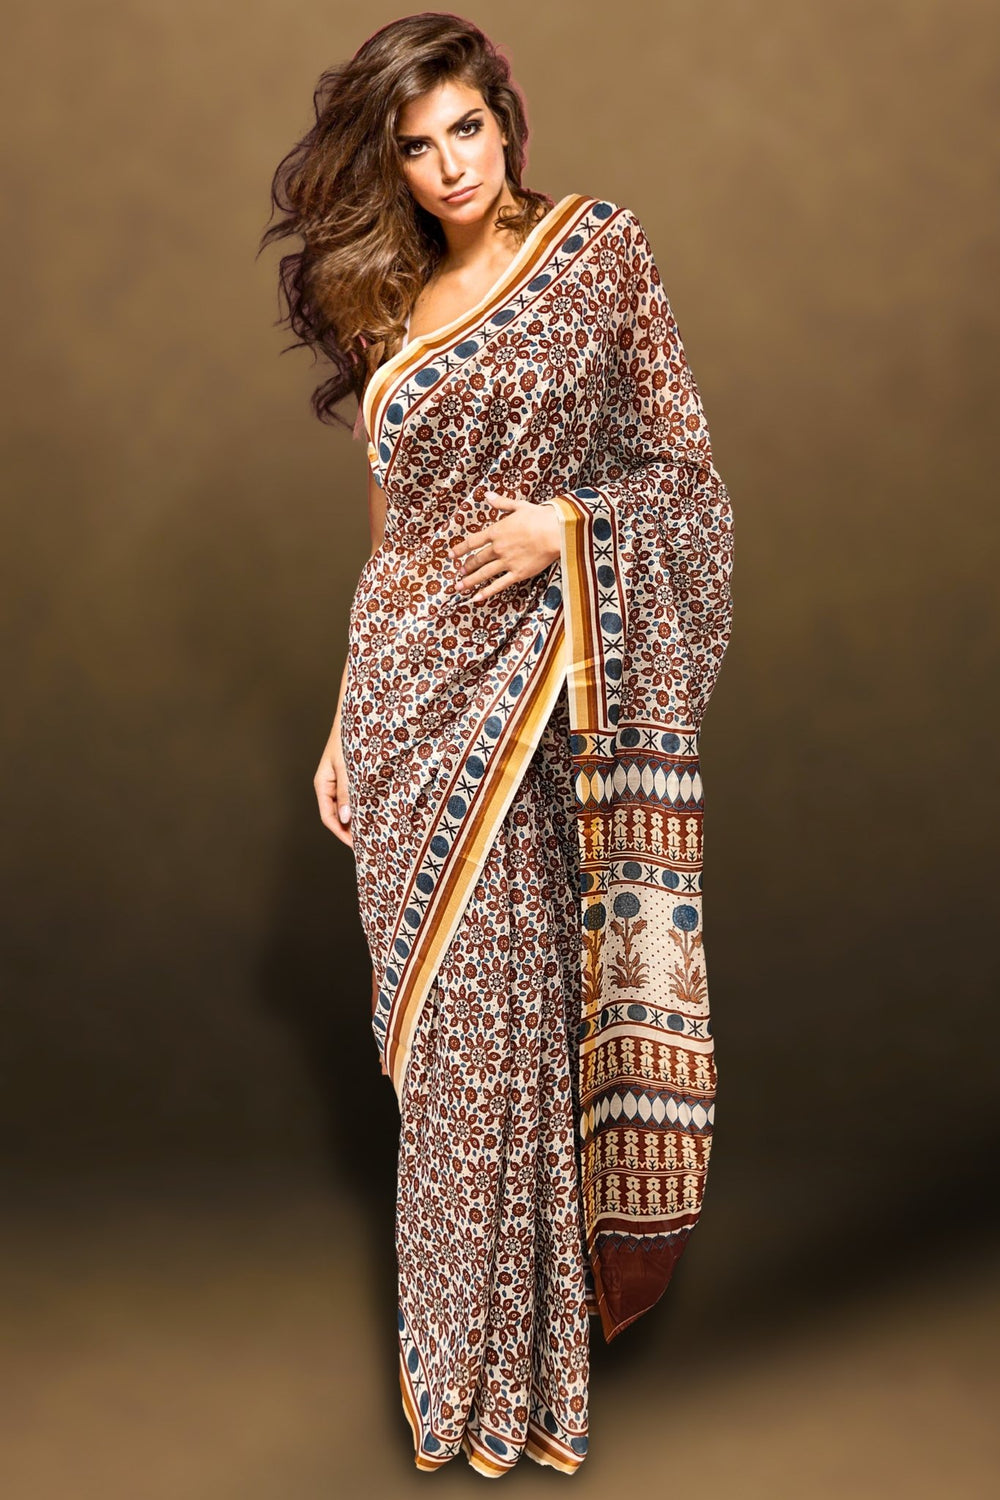 formal saree for office - office wear sarees for ladies - corporate saree - cotton office wear saree - saree for office use - saree office look